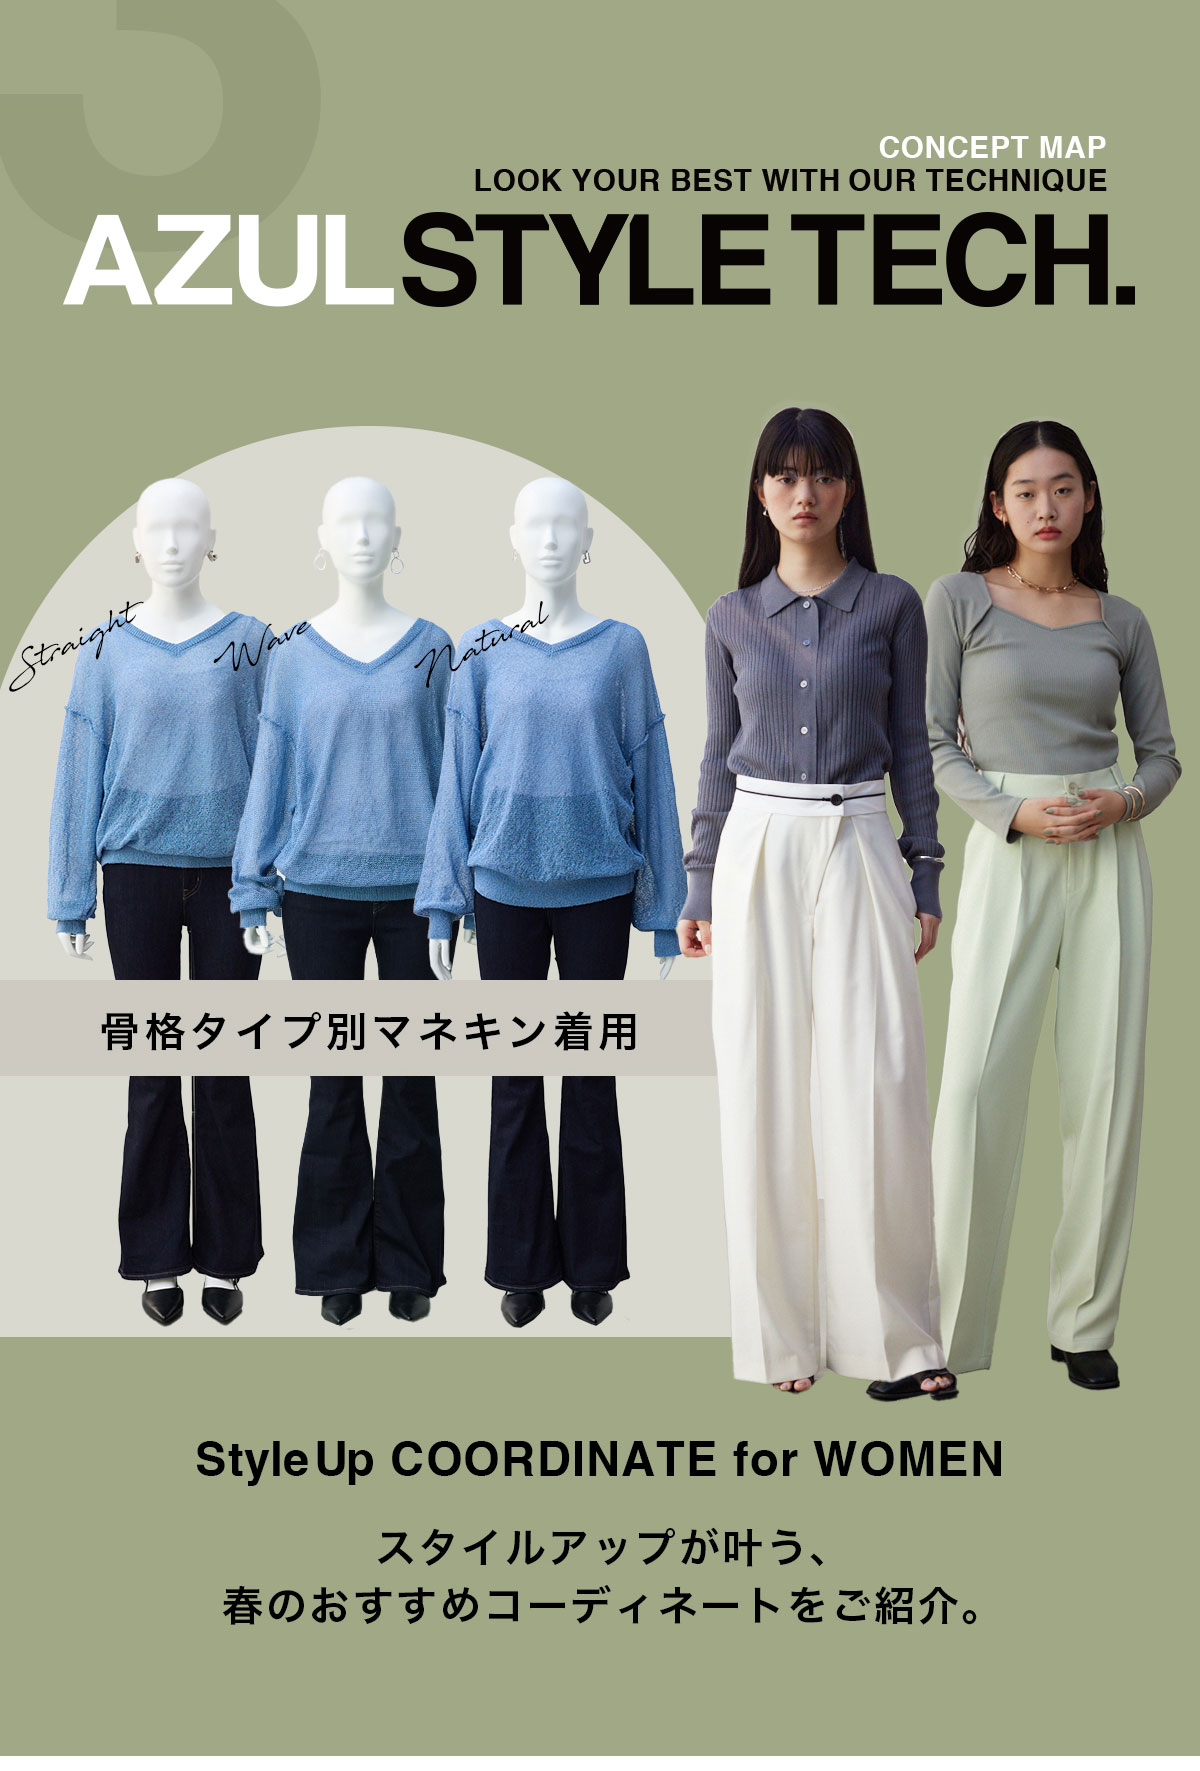 LOOK YOUR BEST WITH OUR TECHNIQUE AZUL STYLE TECH．3 for WOMEN／StyleUp COORDINATE for WOMEN スタイルアップが叶う、春のおすすめコーディネートをご紹介。